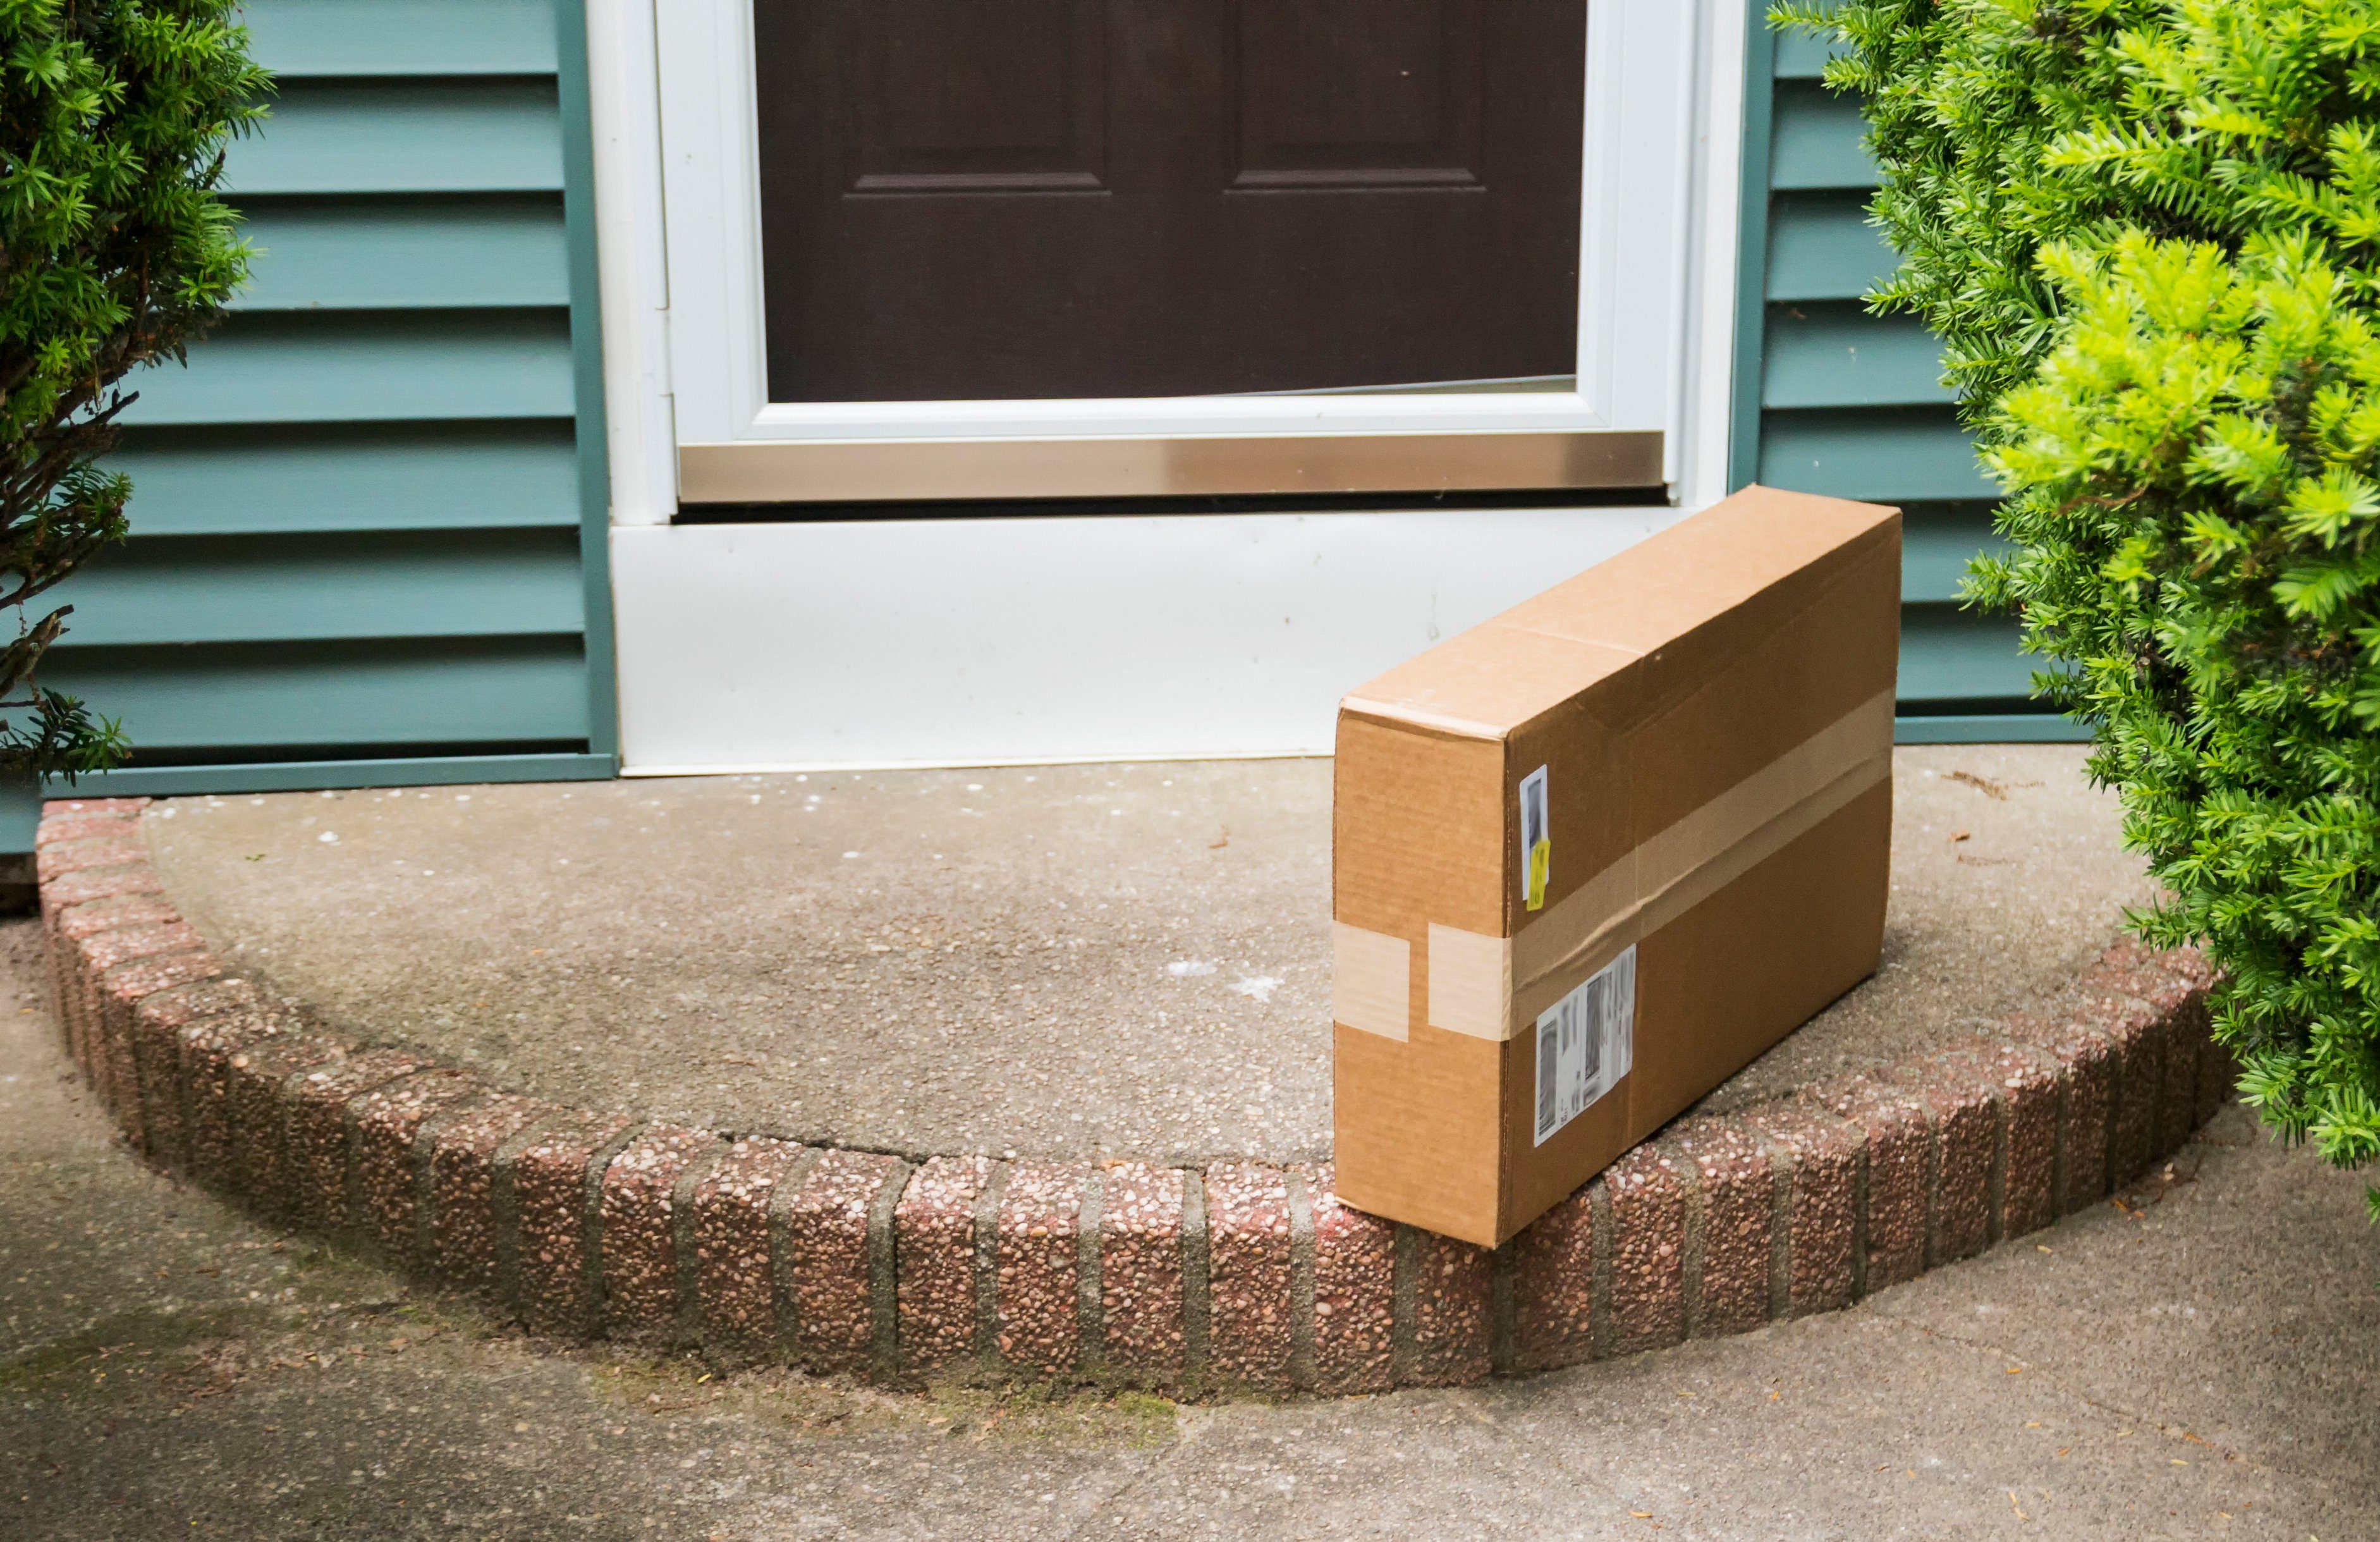 A brown cardboard box is left on the front stoop after being delivered while no one was home.